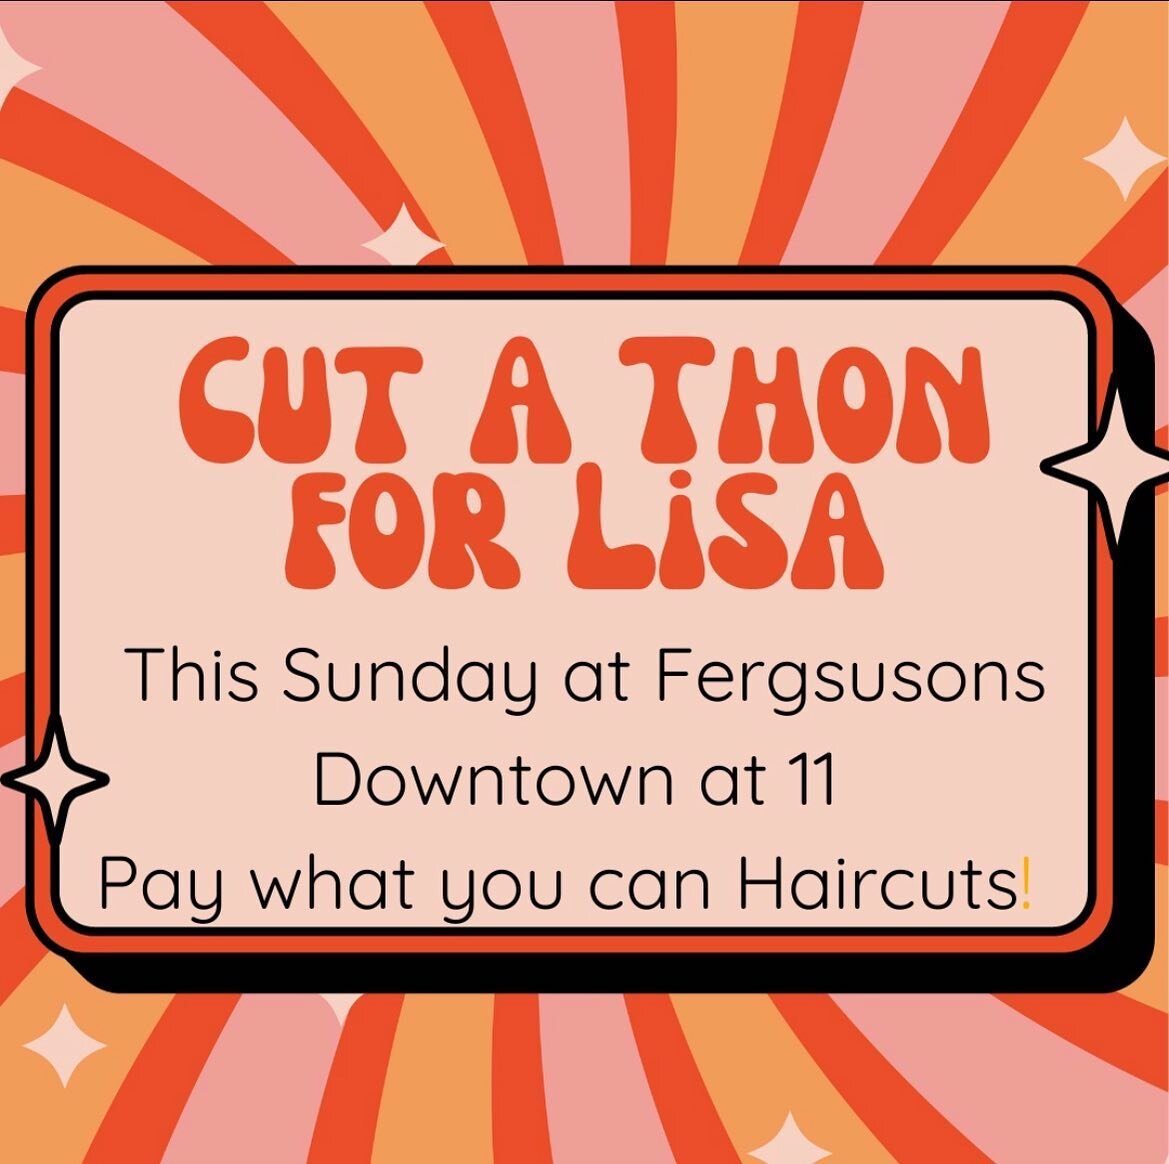 Cut a thon- this Sunday October 29 starting at 11pm @fergusonsdowntown  PAY WHAT YOU CAN haircuts- suggested tip 40$. We are donating our profits to our security guard who has some medical bills to pay for. Please come and support and pay what you ca